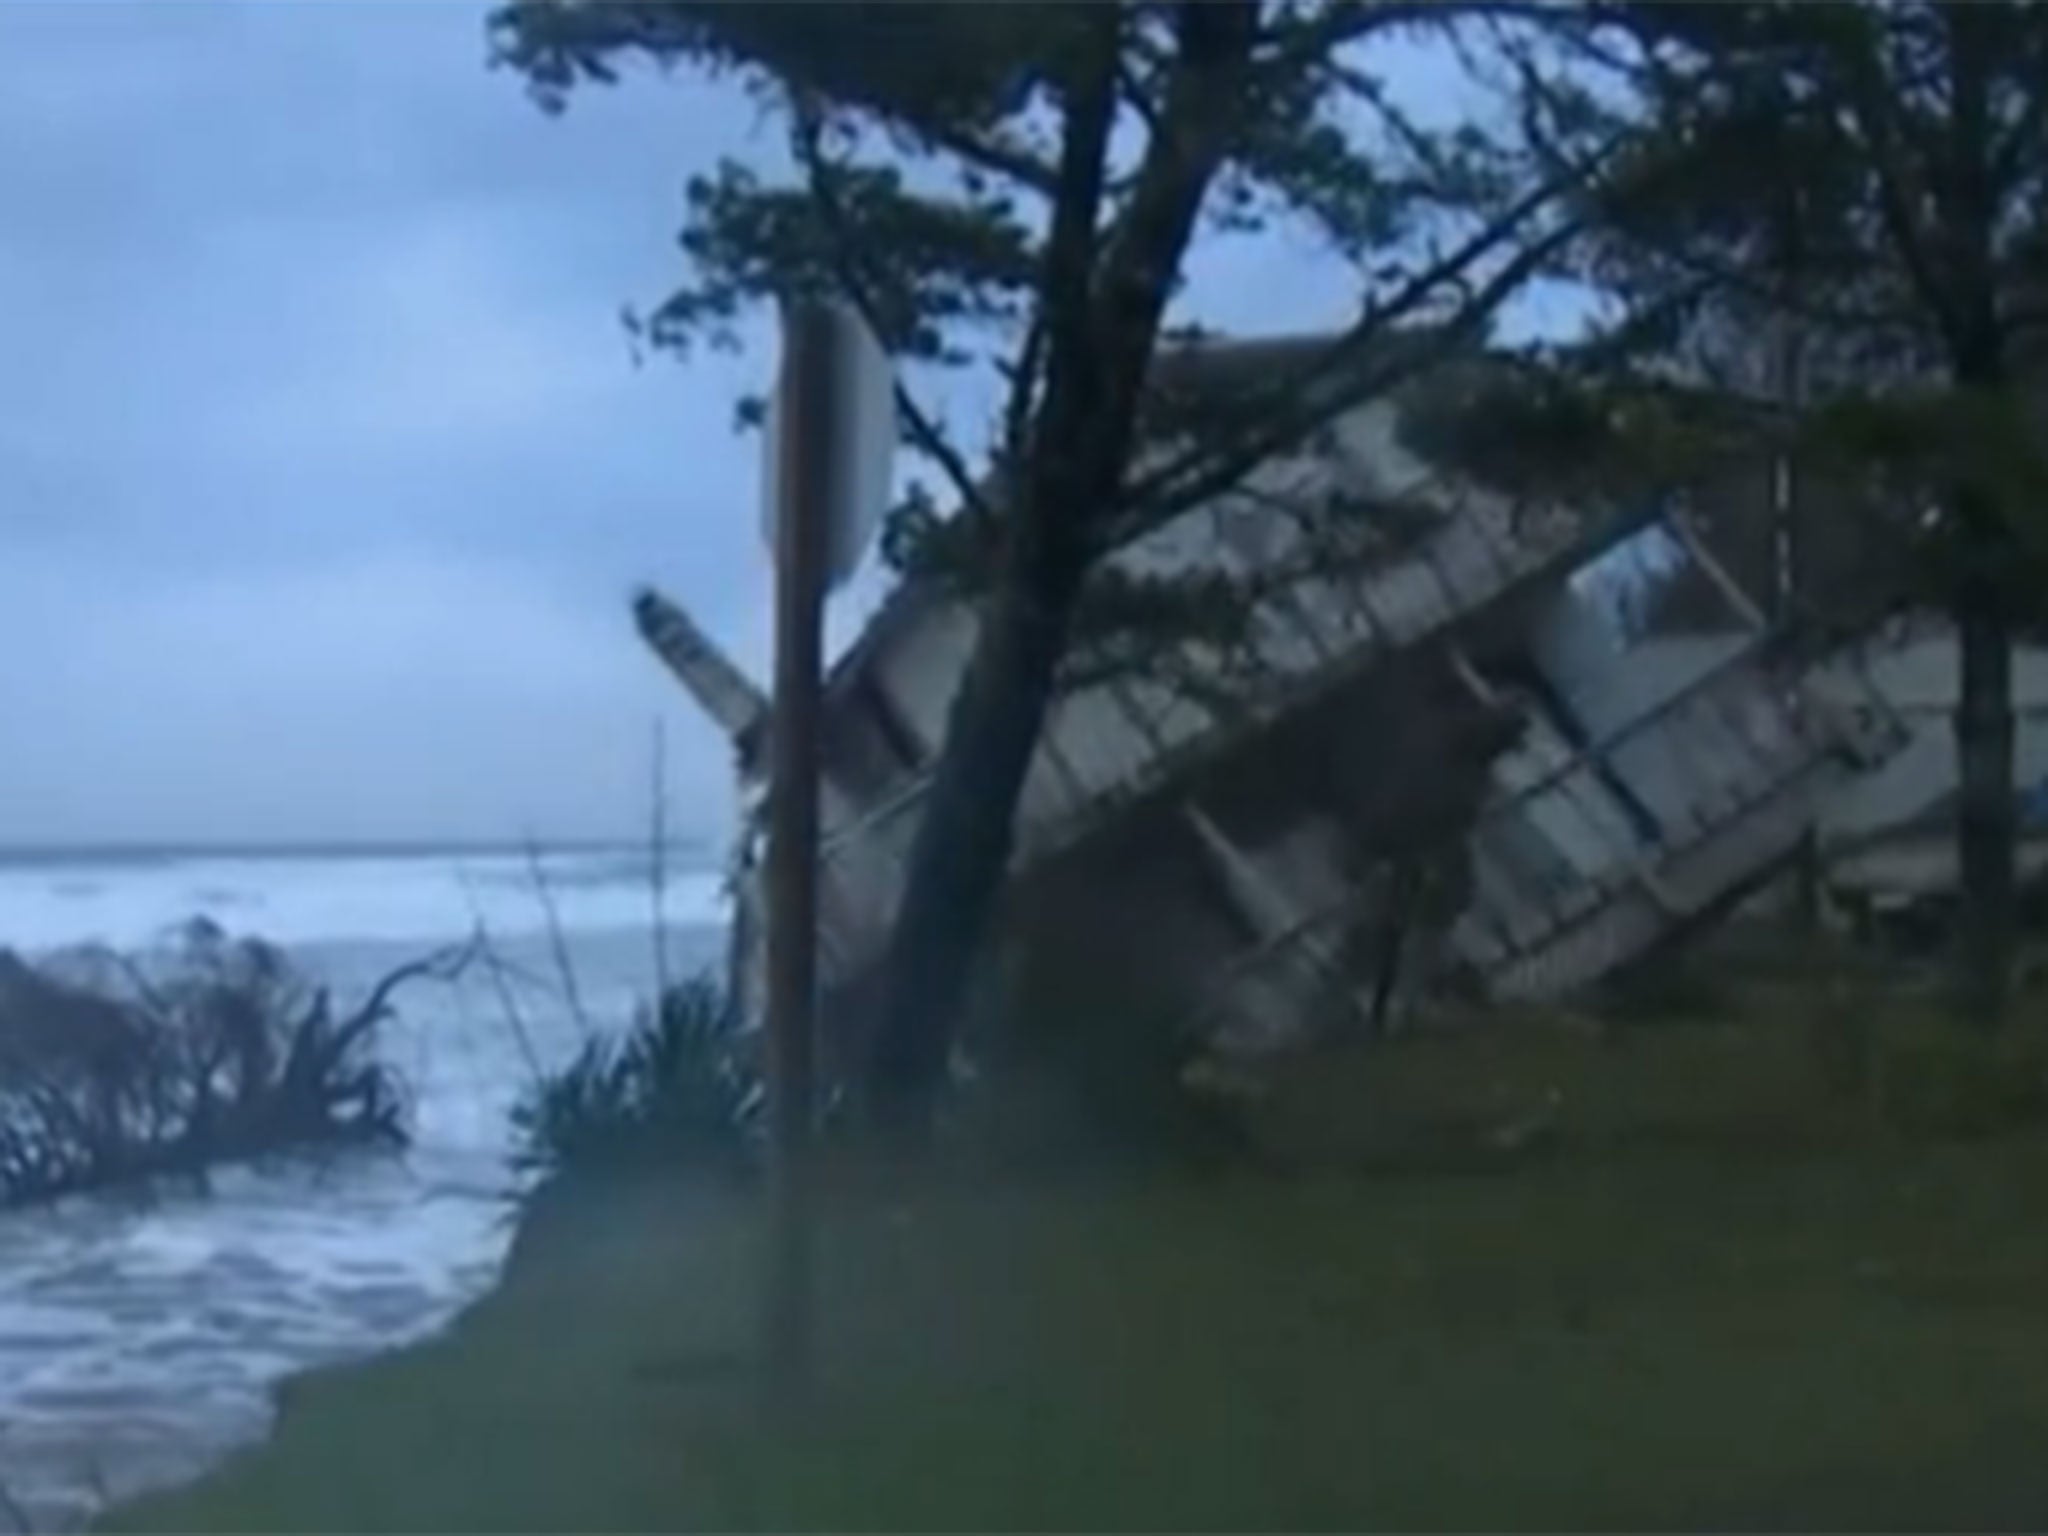 House slides into the sea as western US coast battered by storms.